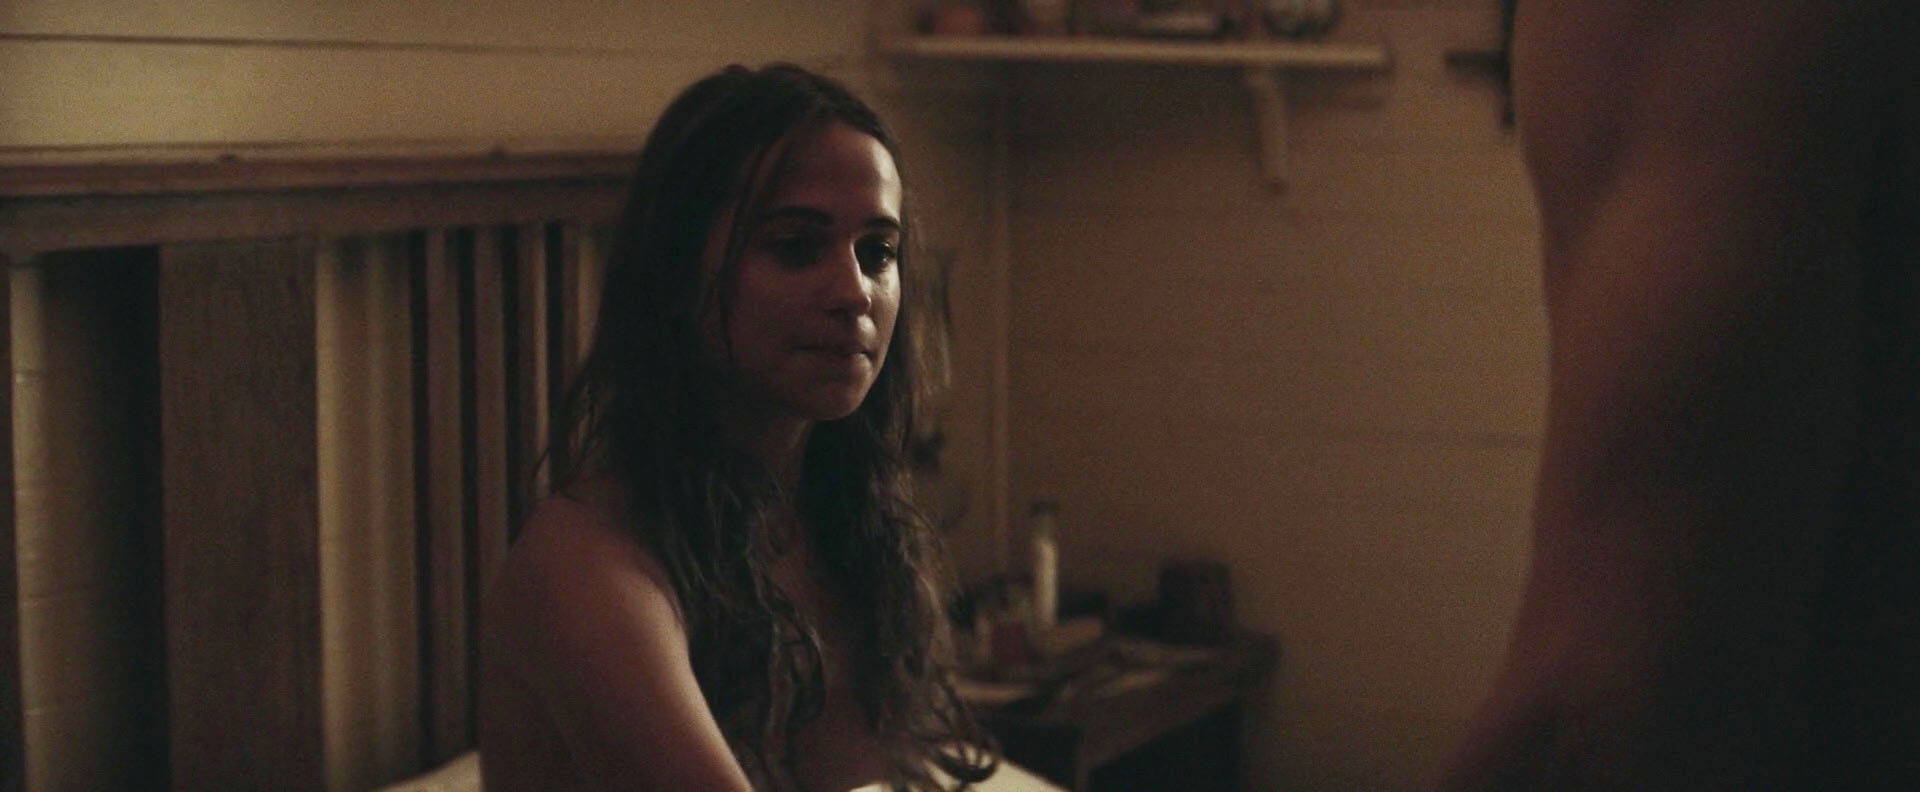 Nude Video Celebs Alicia Vikander Sexy The Light Between Oceans 2016